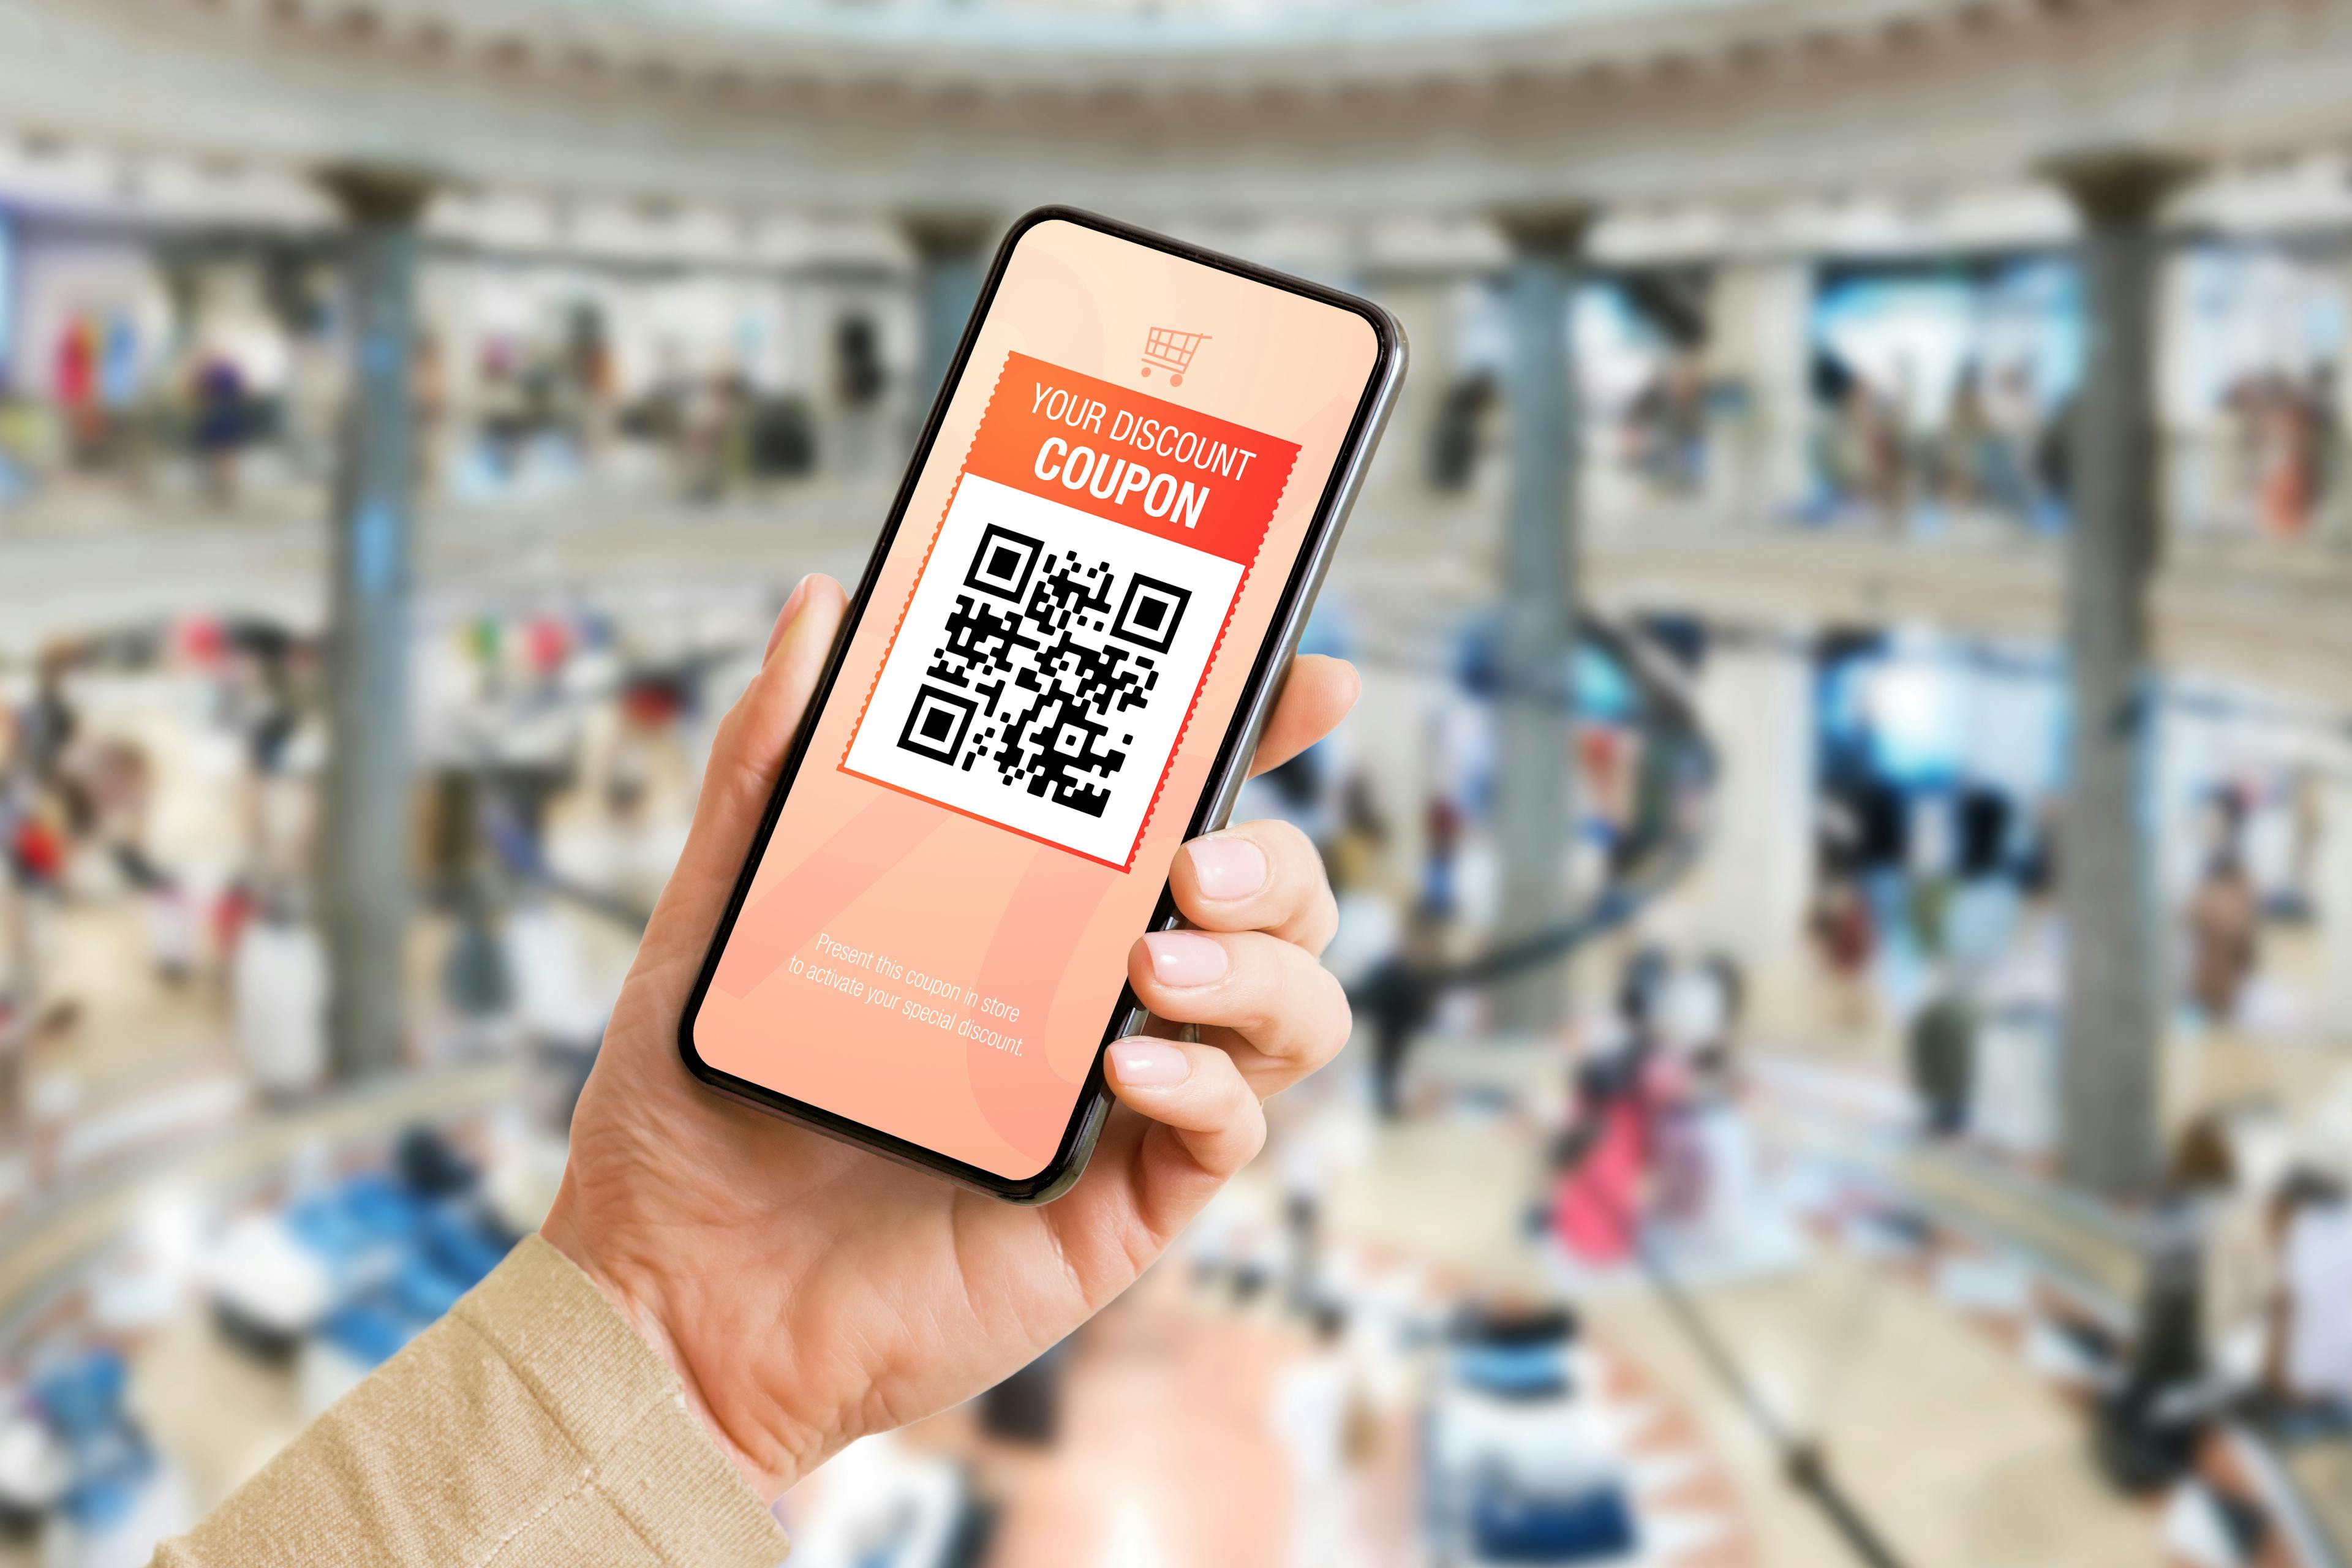 A person is holding a phone that shows a QR code with a coupon.